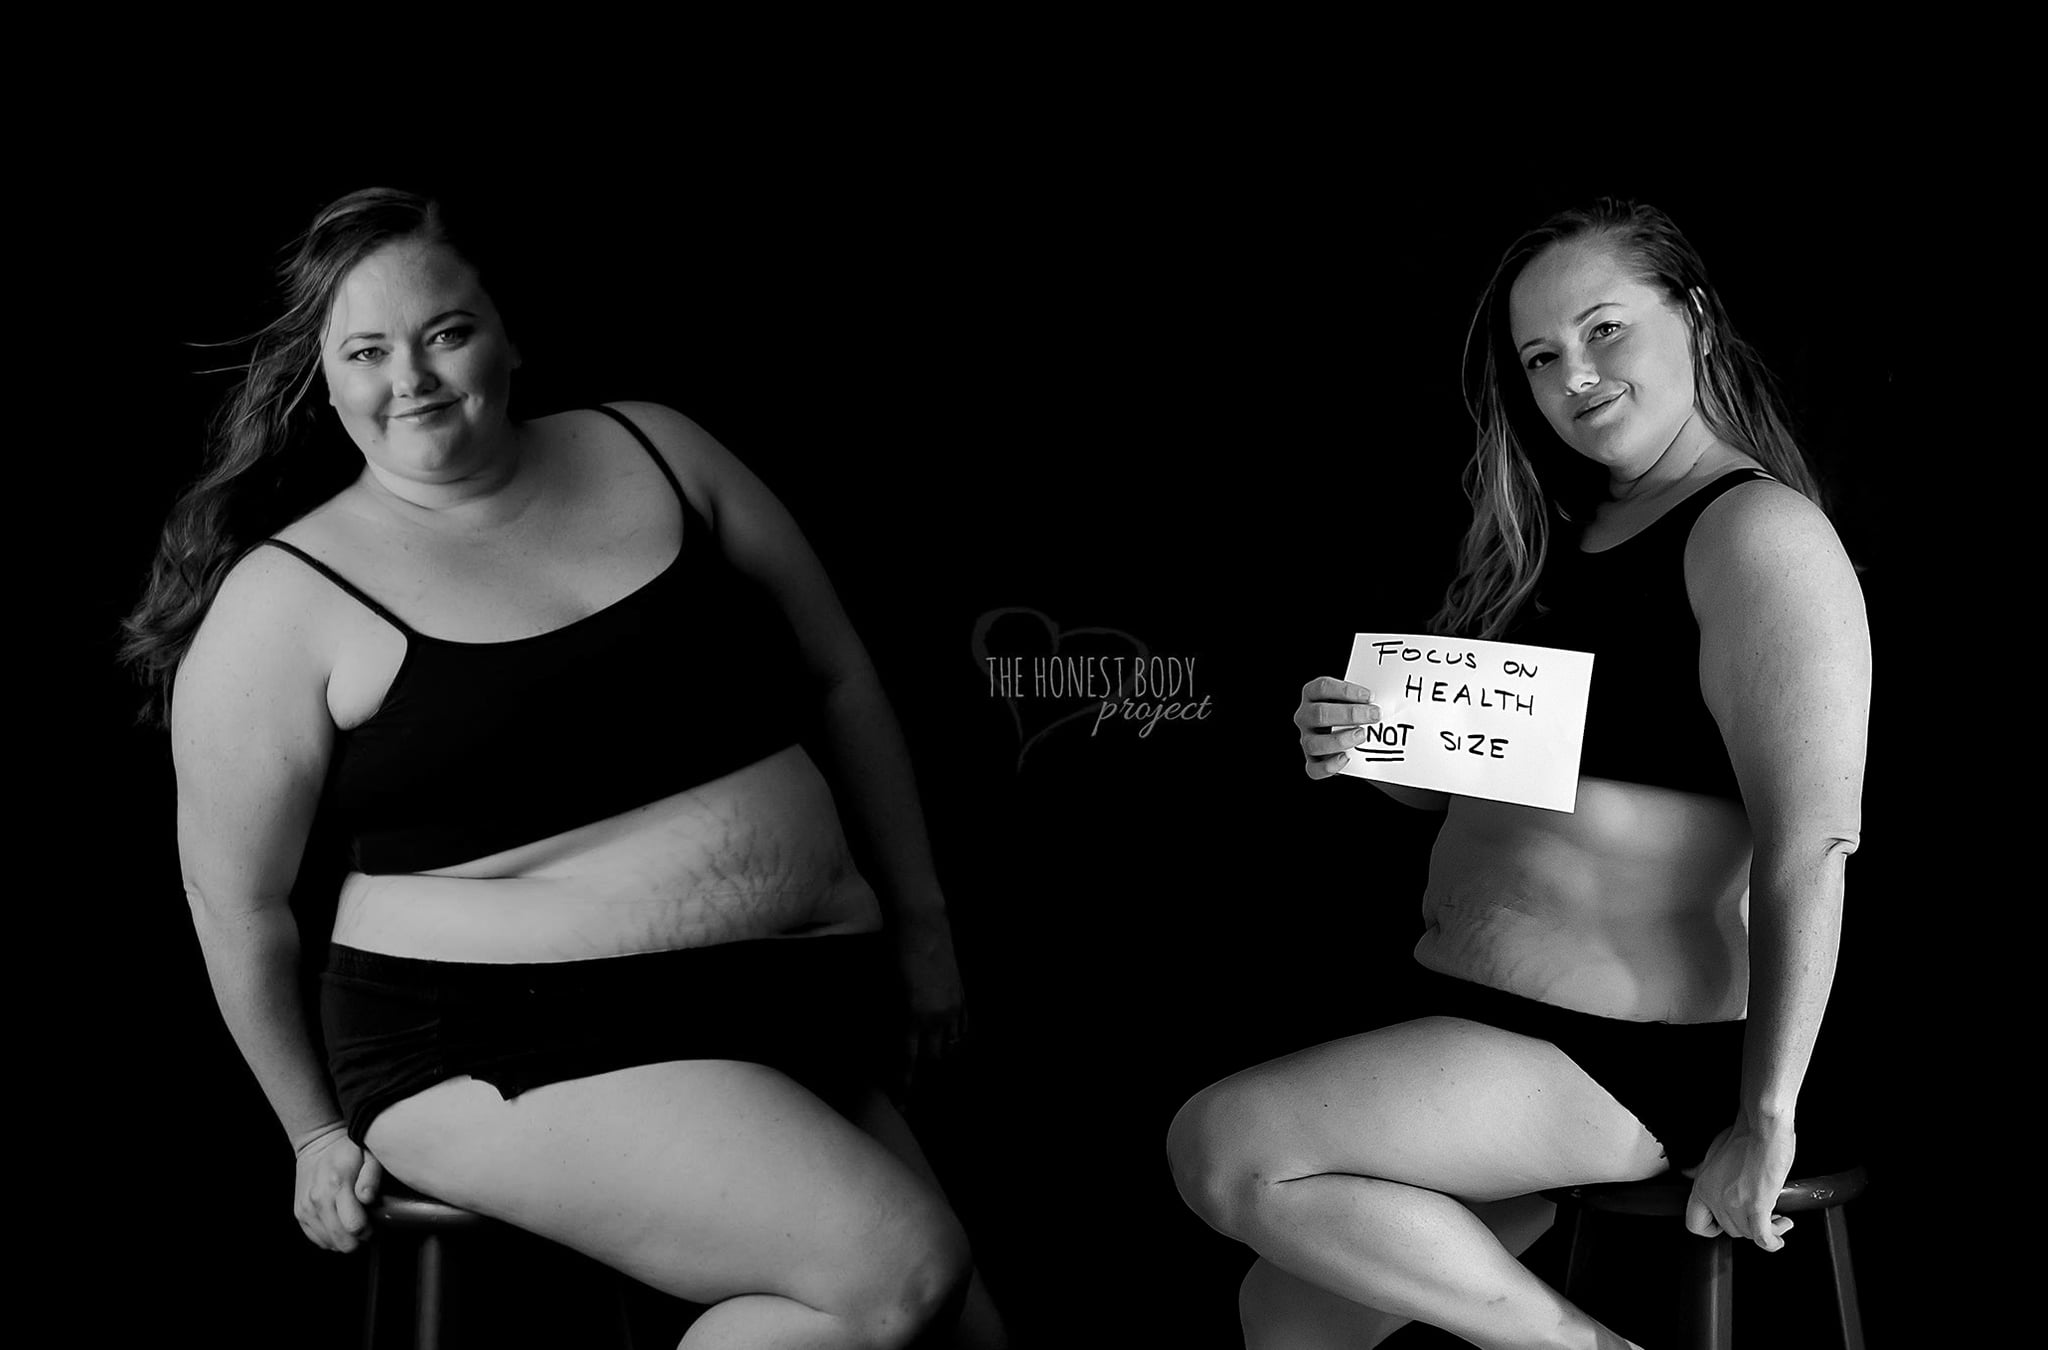 Focus On Health by The Honest Body Project